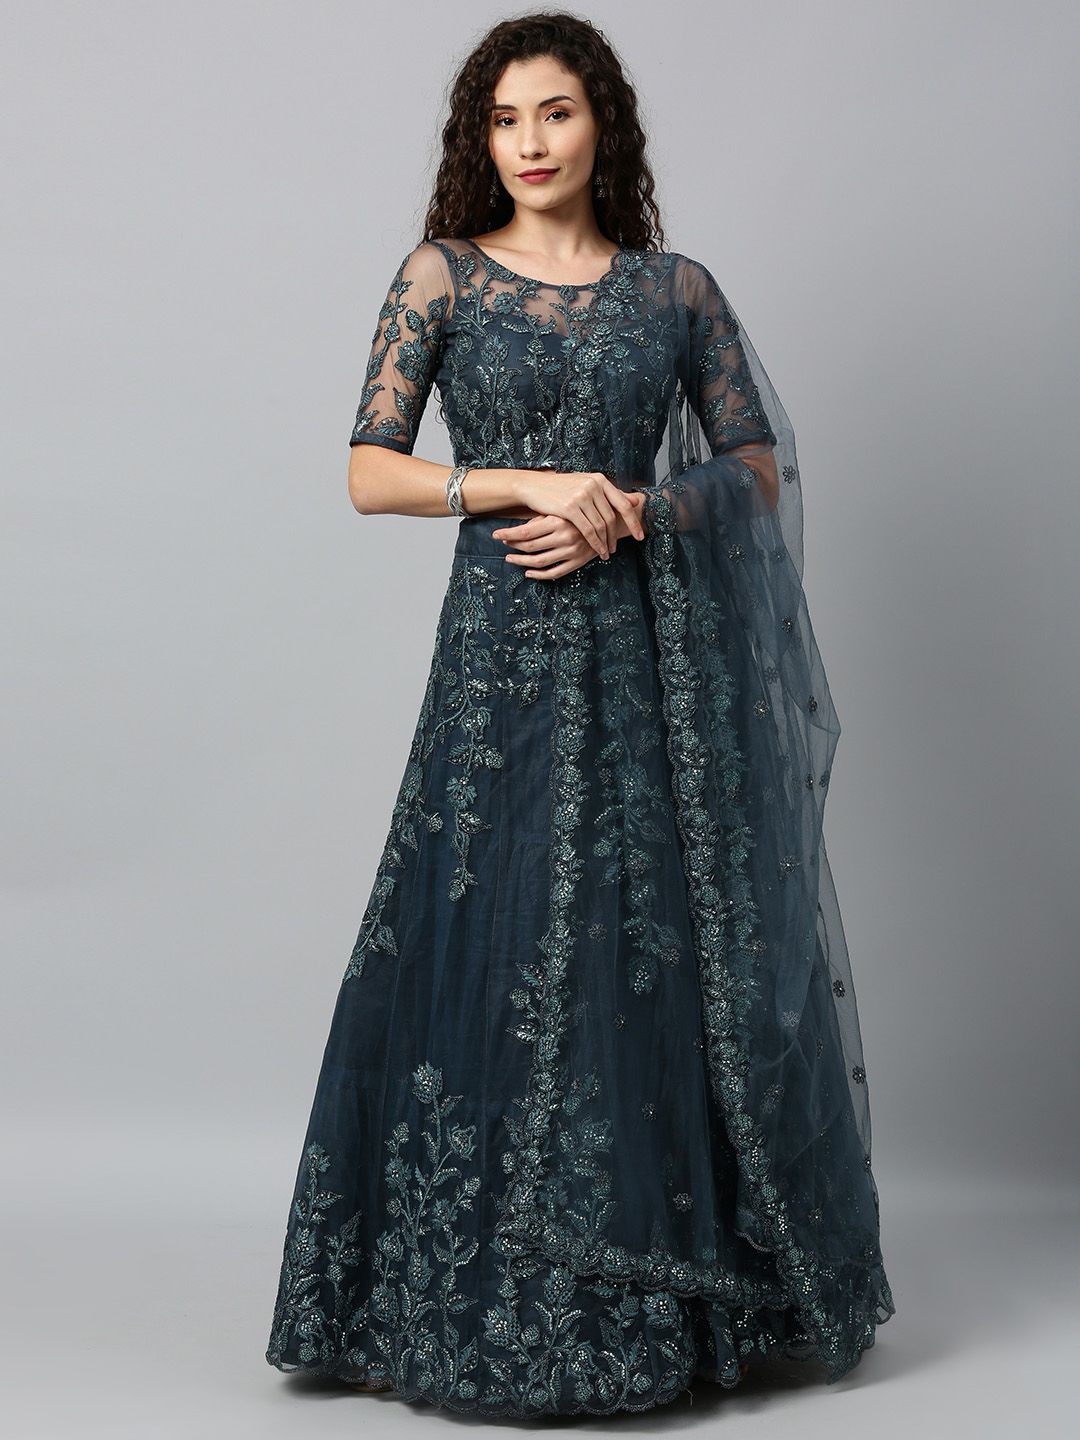 panchhi Teal Blue Embellished Semi-Stitched Lehenga & Unstitched Blouse with Dupatta Price in India